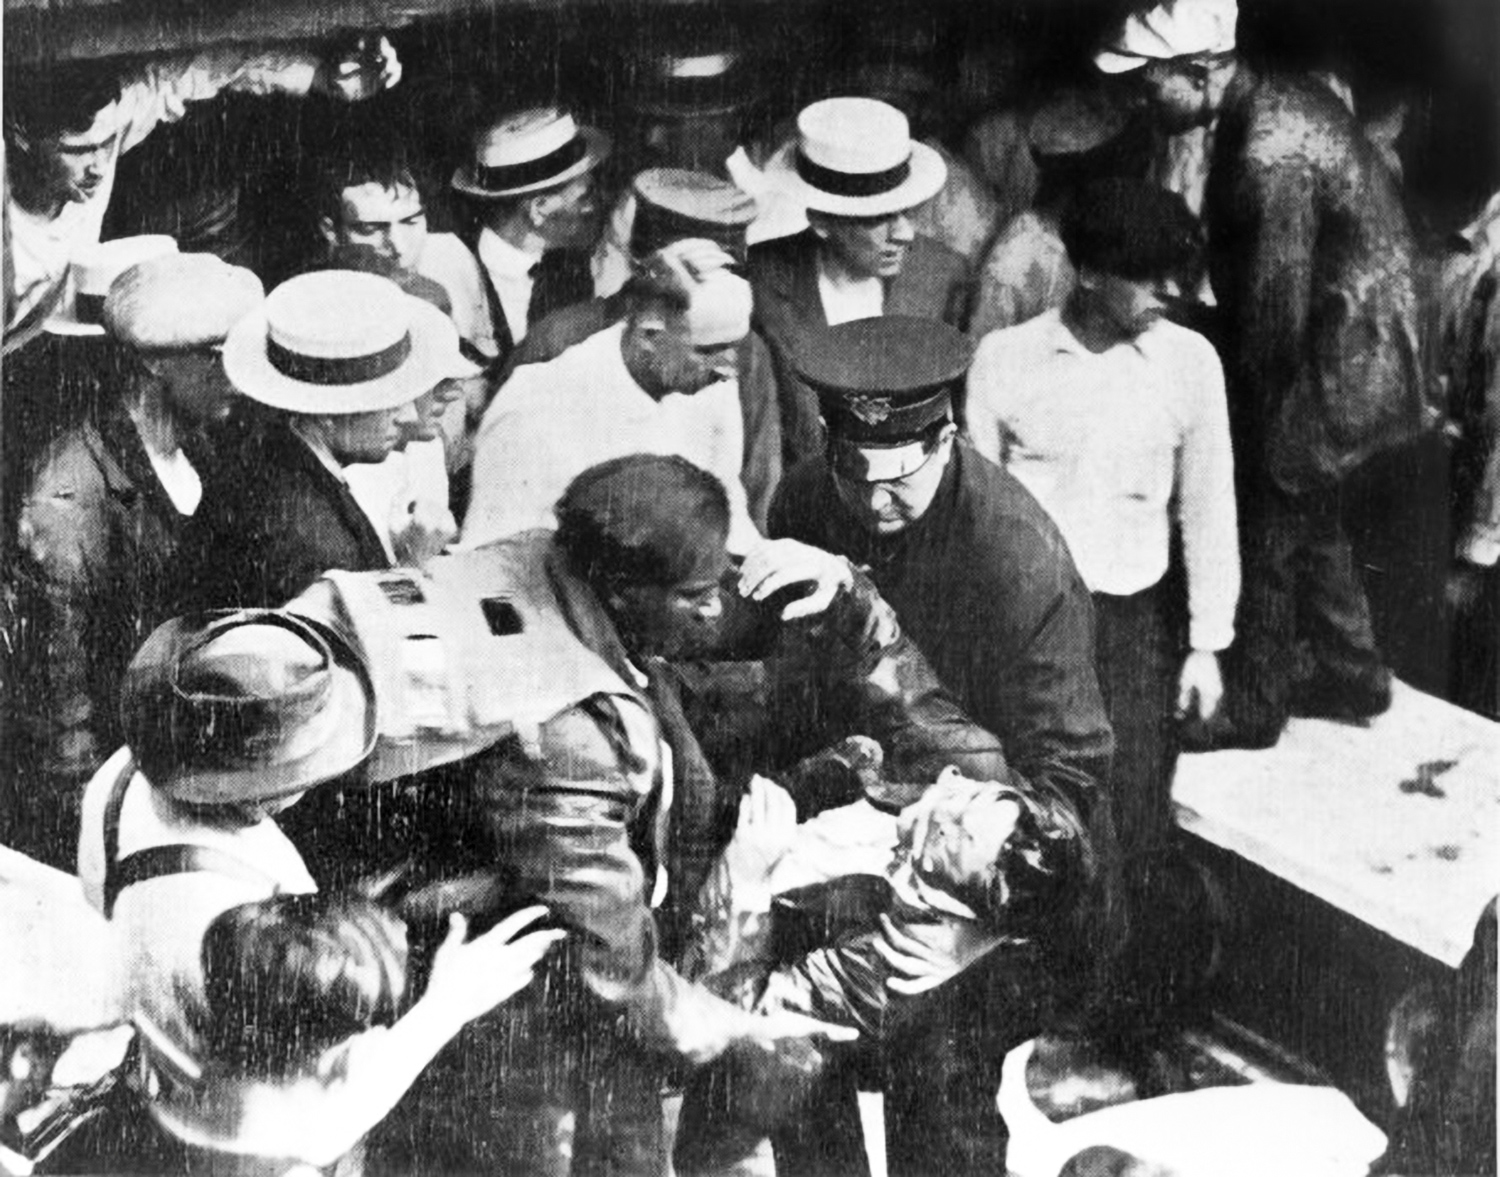 Morgan, with his safety hood draping across his back, supports an unconscious man while a crowd gathers around him